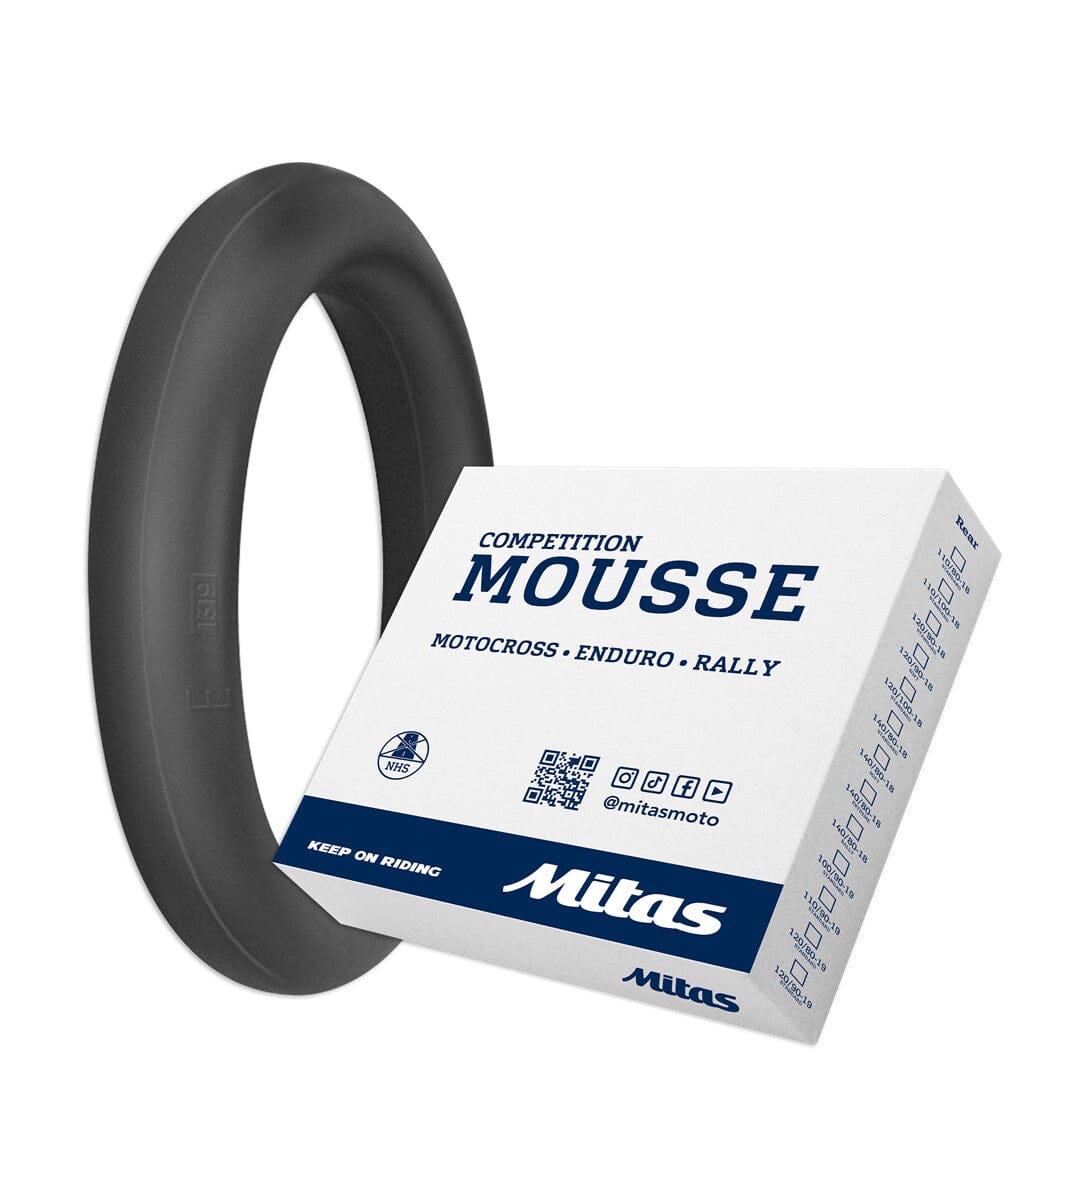 Mitas CYLINDRICAL 80/100-21 STANDARD Front Mousse Motorcycle Tires Mitas 